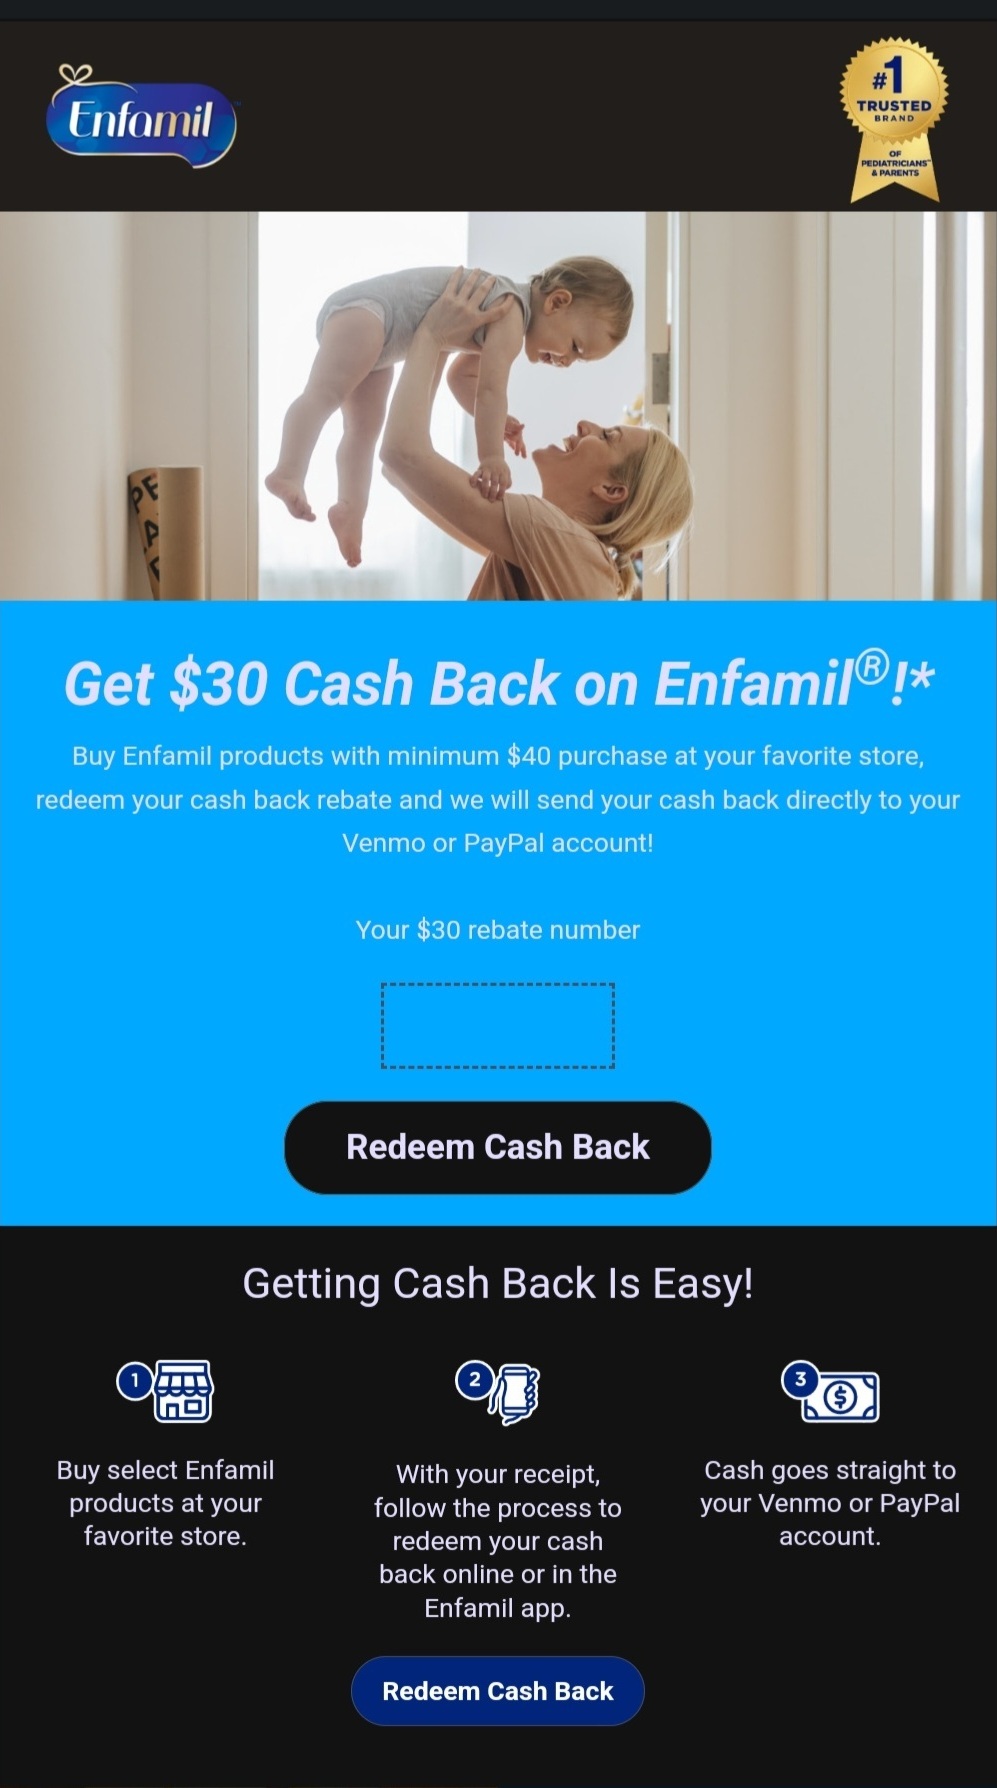 Free $30 cash back via venmo/PayPal with purchase of $40+ of select enfamil products